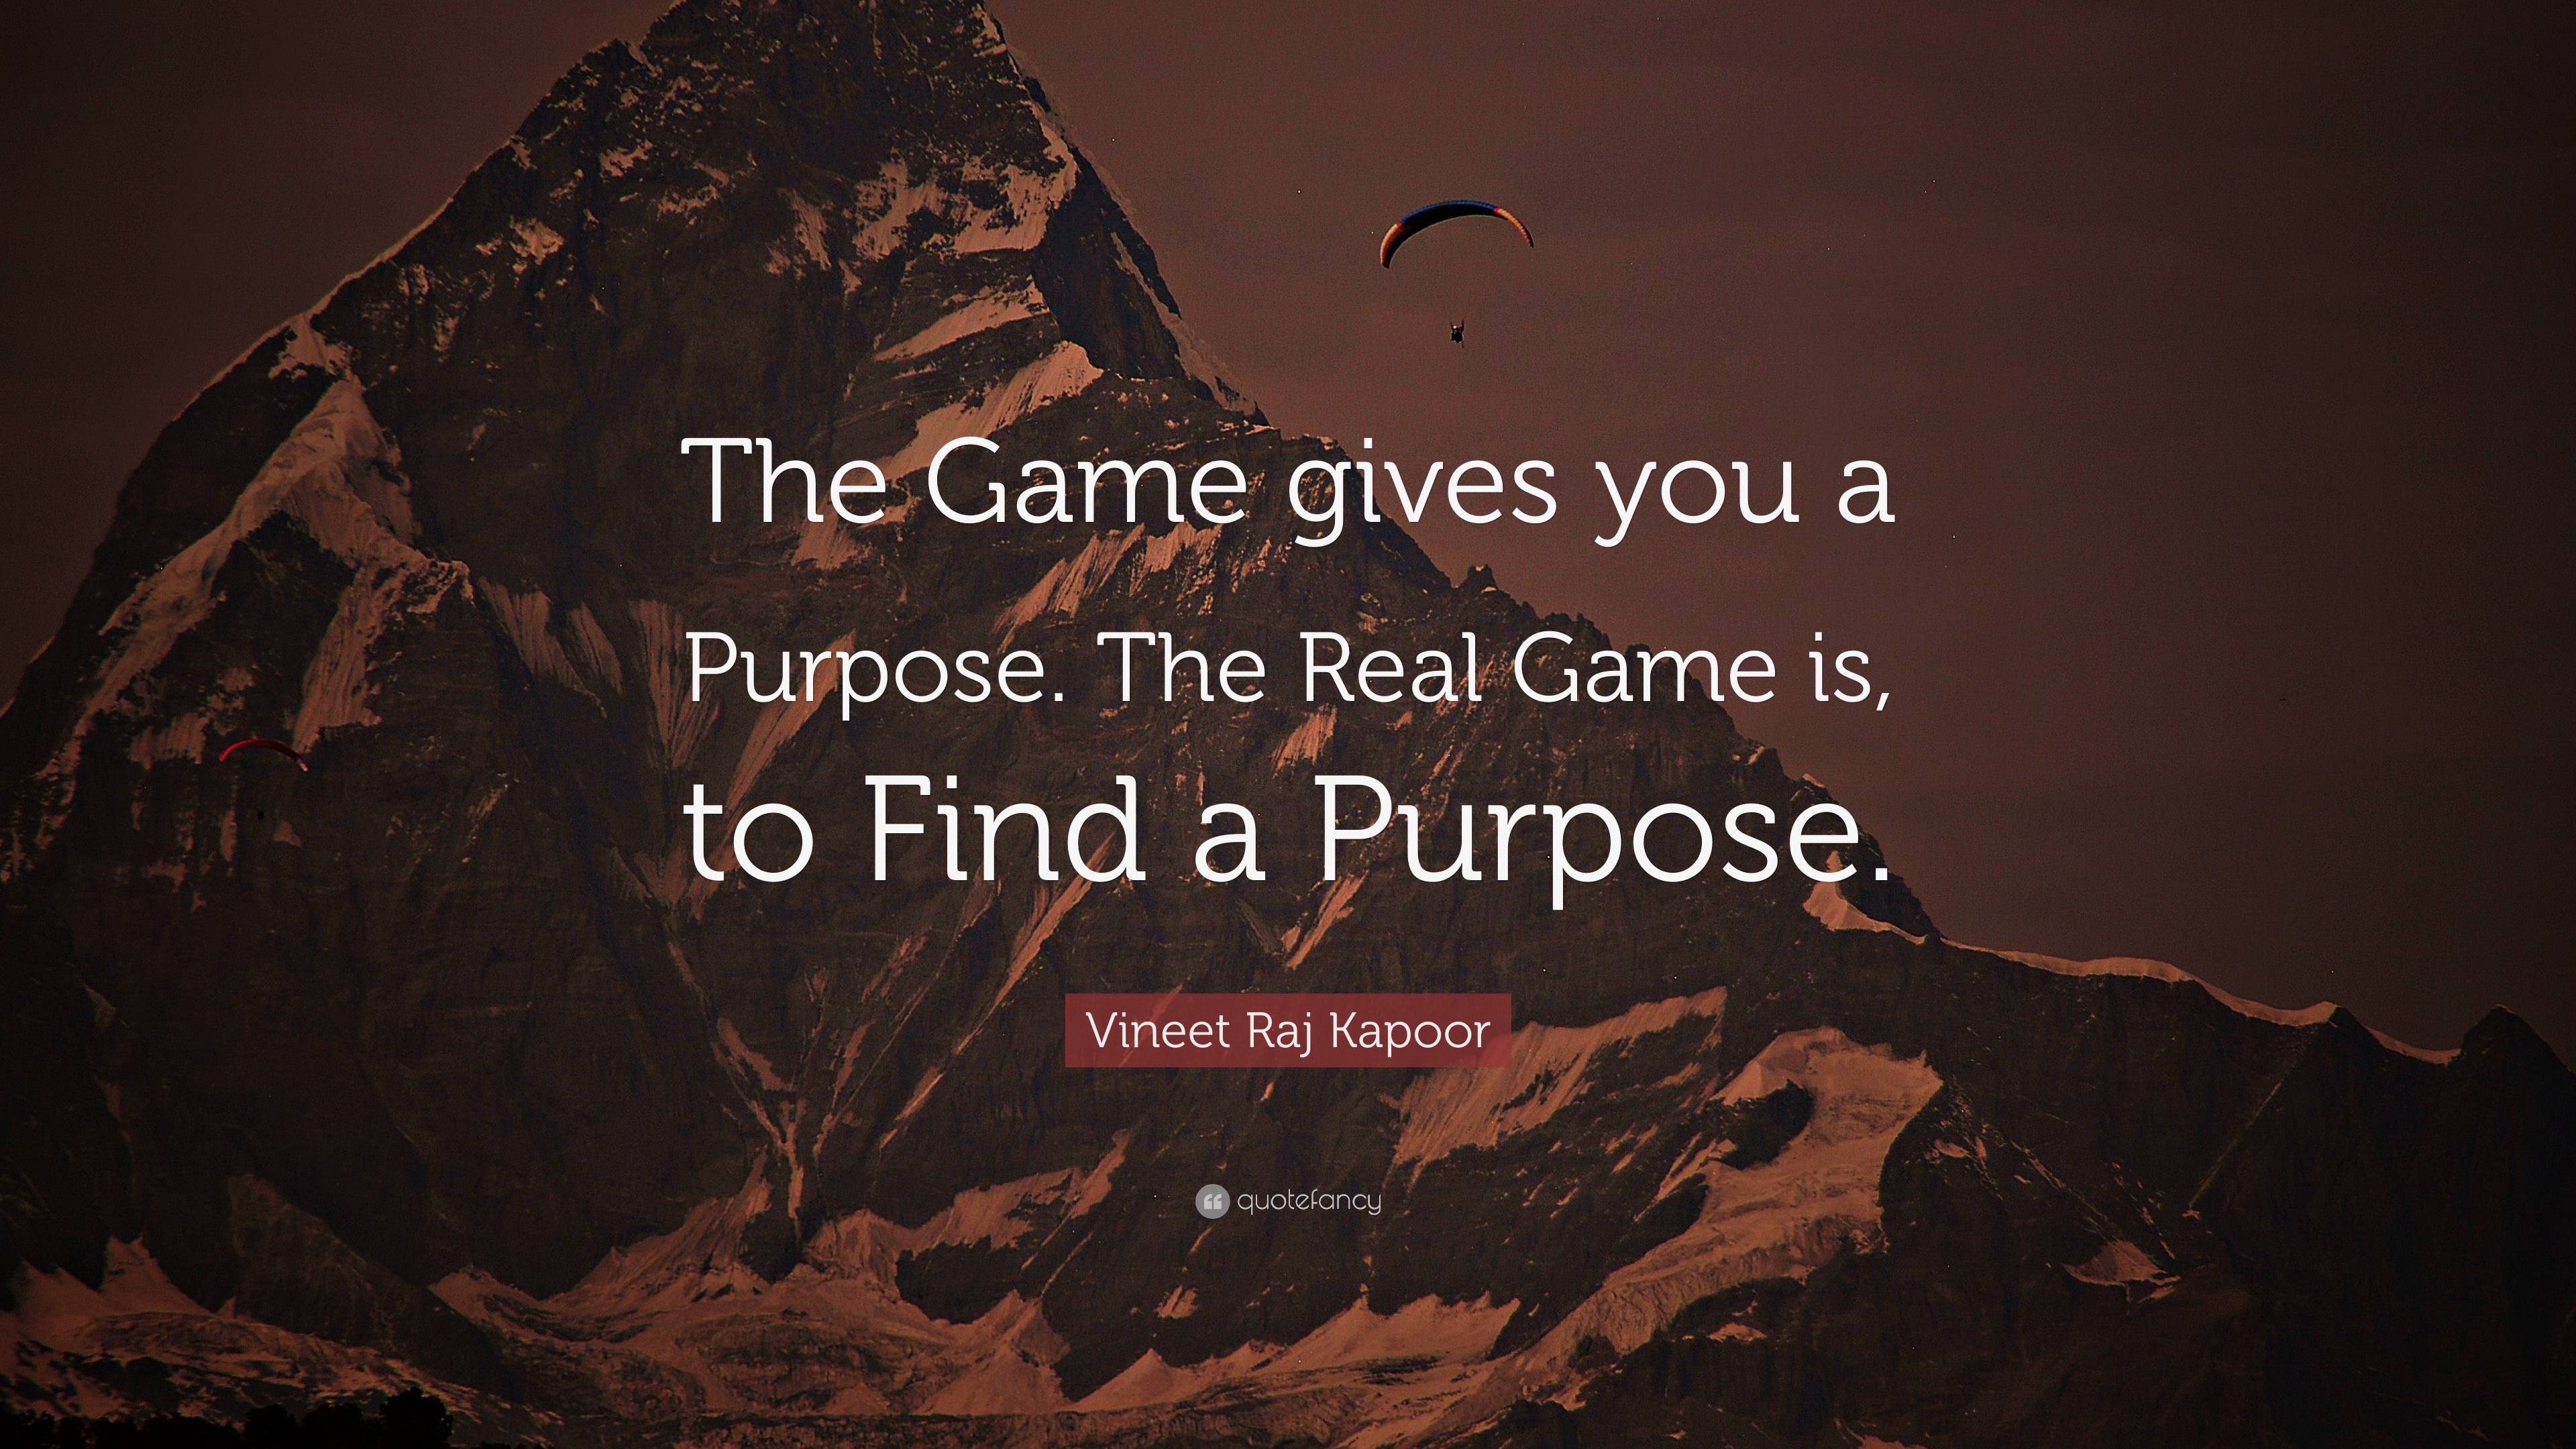 Vineet Raj Kapoor Quote: “The Game gives you a Purpose. The Real